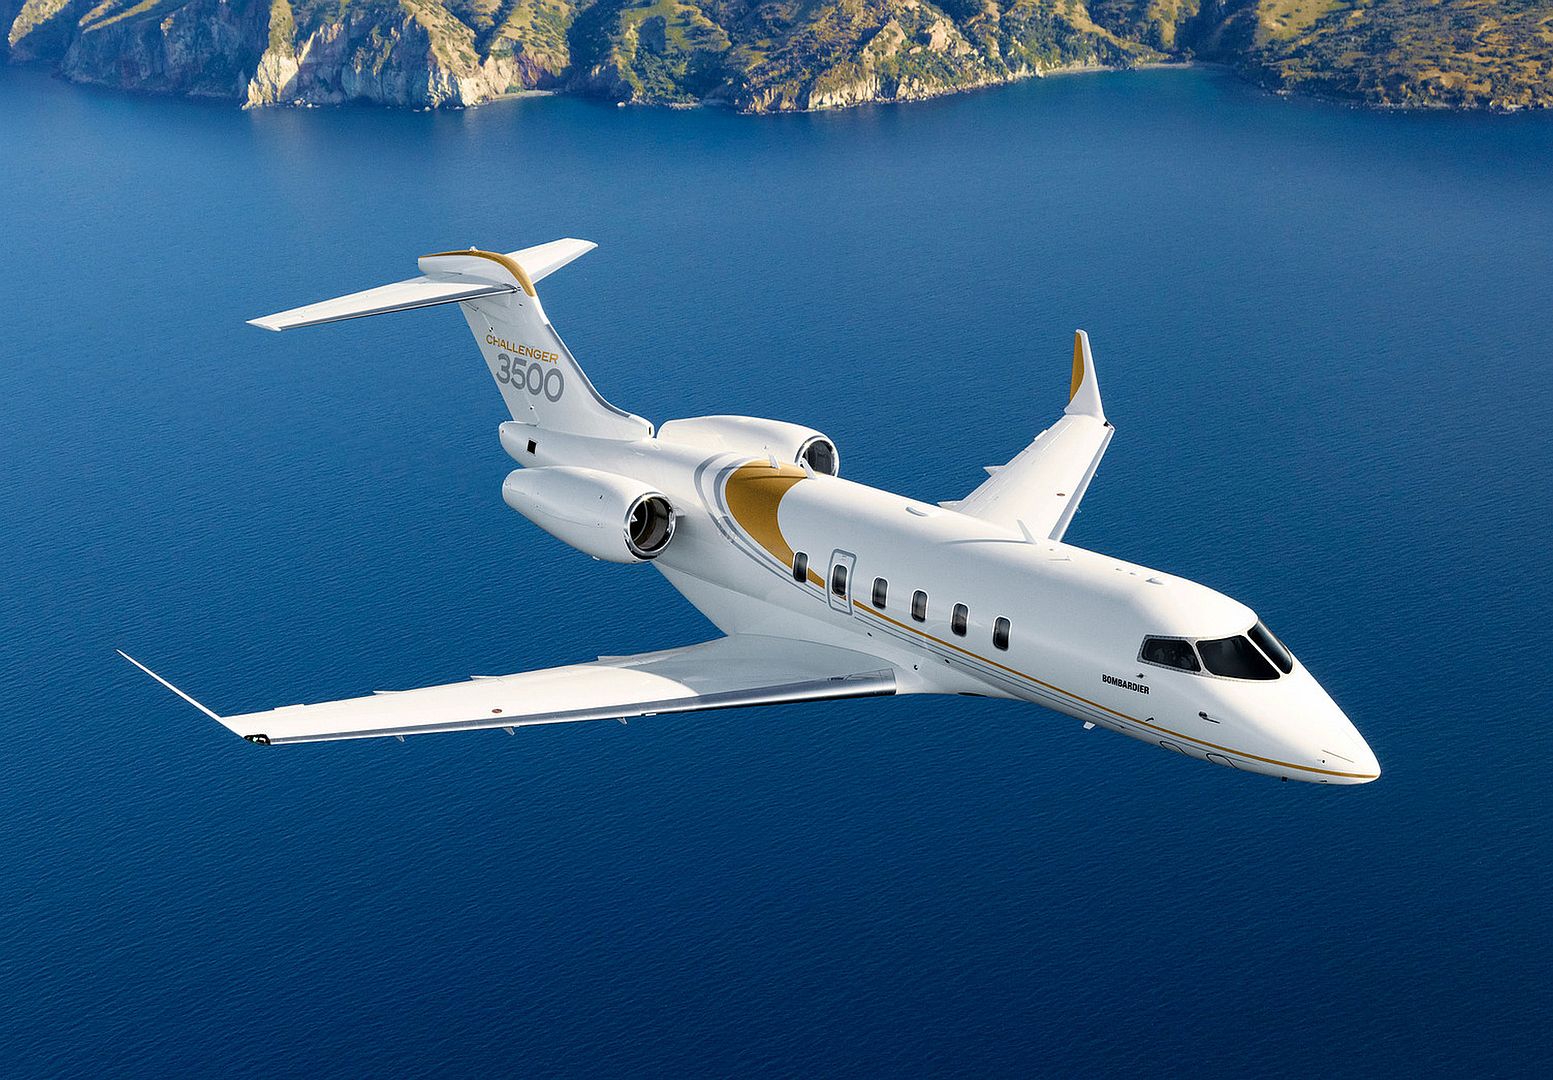 Challenger 3500 Exterior Inflight Blue Water And Mountains